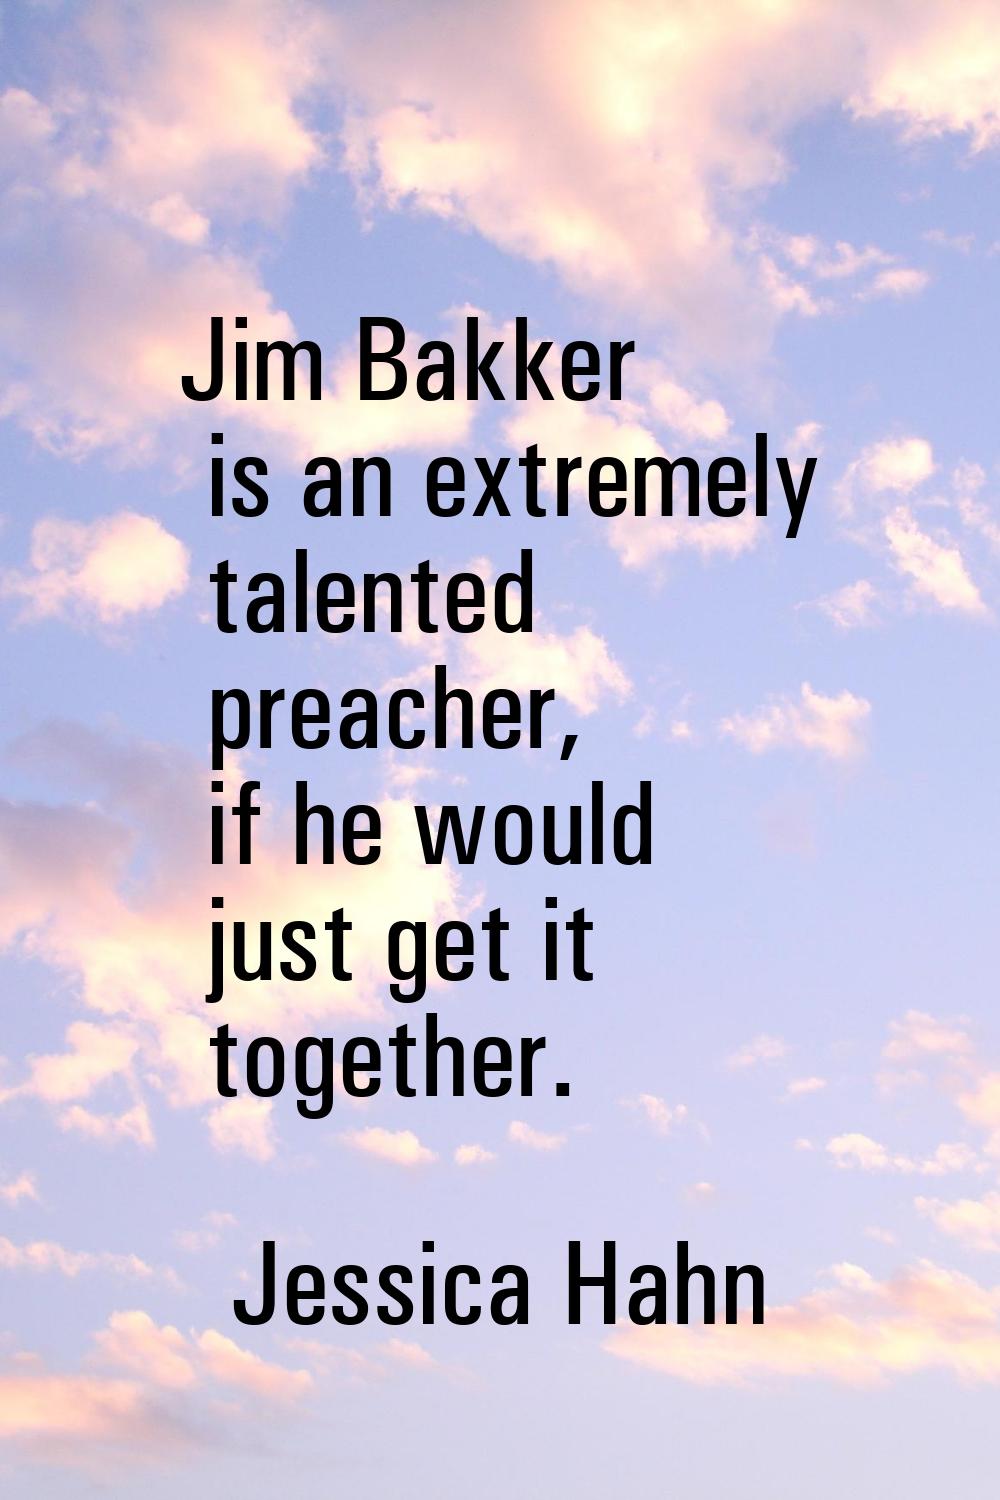 Jim Bakker is an extremely talented preacher, if he would just get it together.